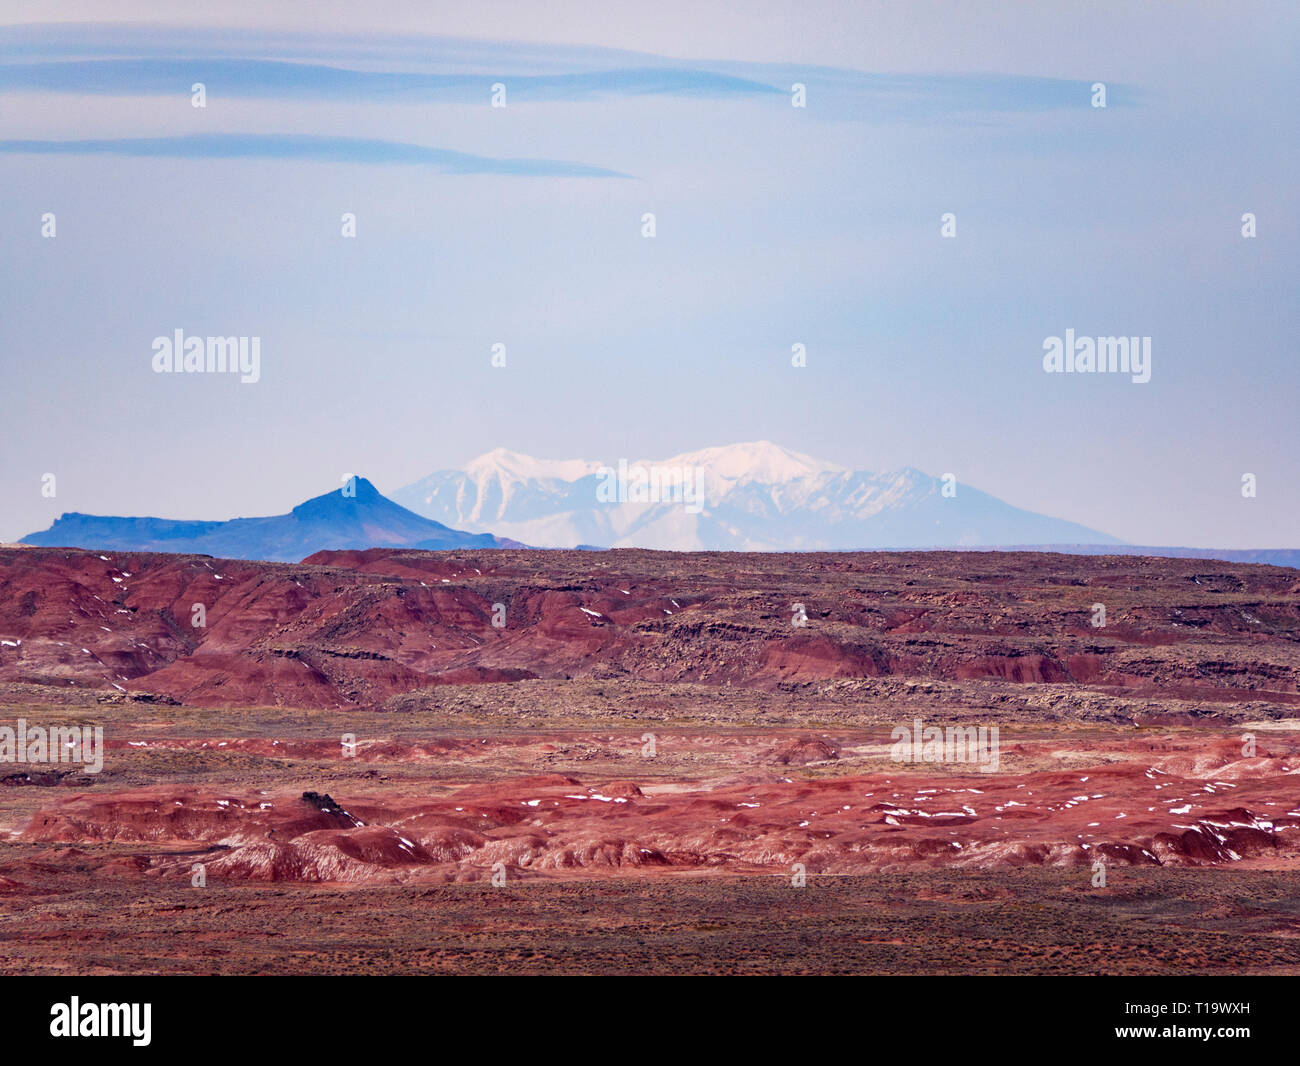 View of the Painted Desert from Pintado Point, Petrified Forest National Park. San Francisco Peaks on horizon over 100 miles away, base below horizon. Stock Photo